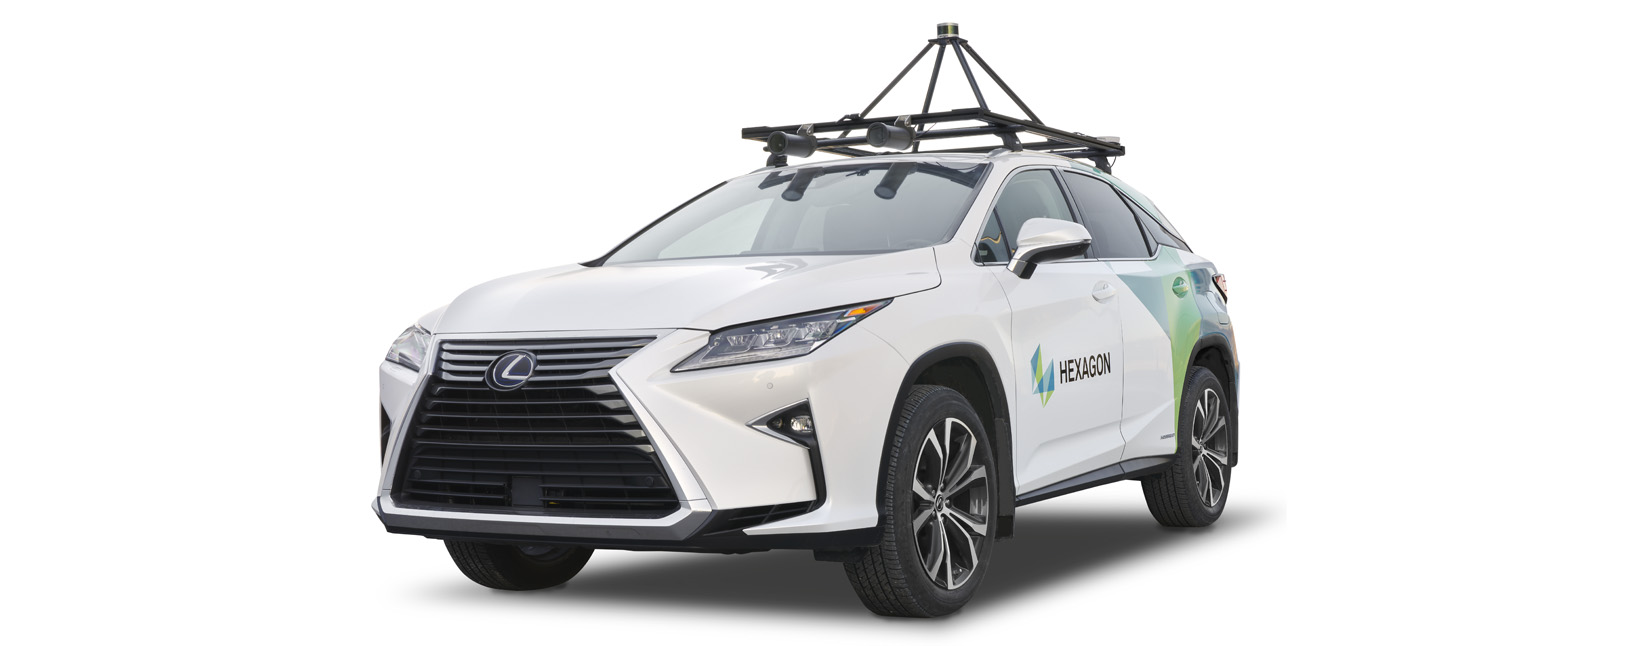 Lexus with roof rack and bumper sensors